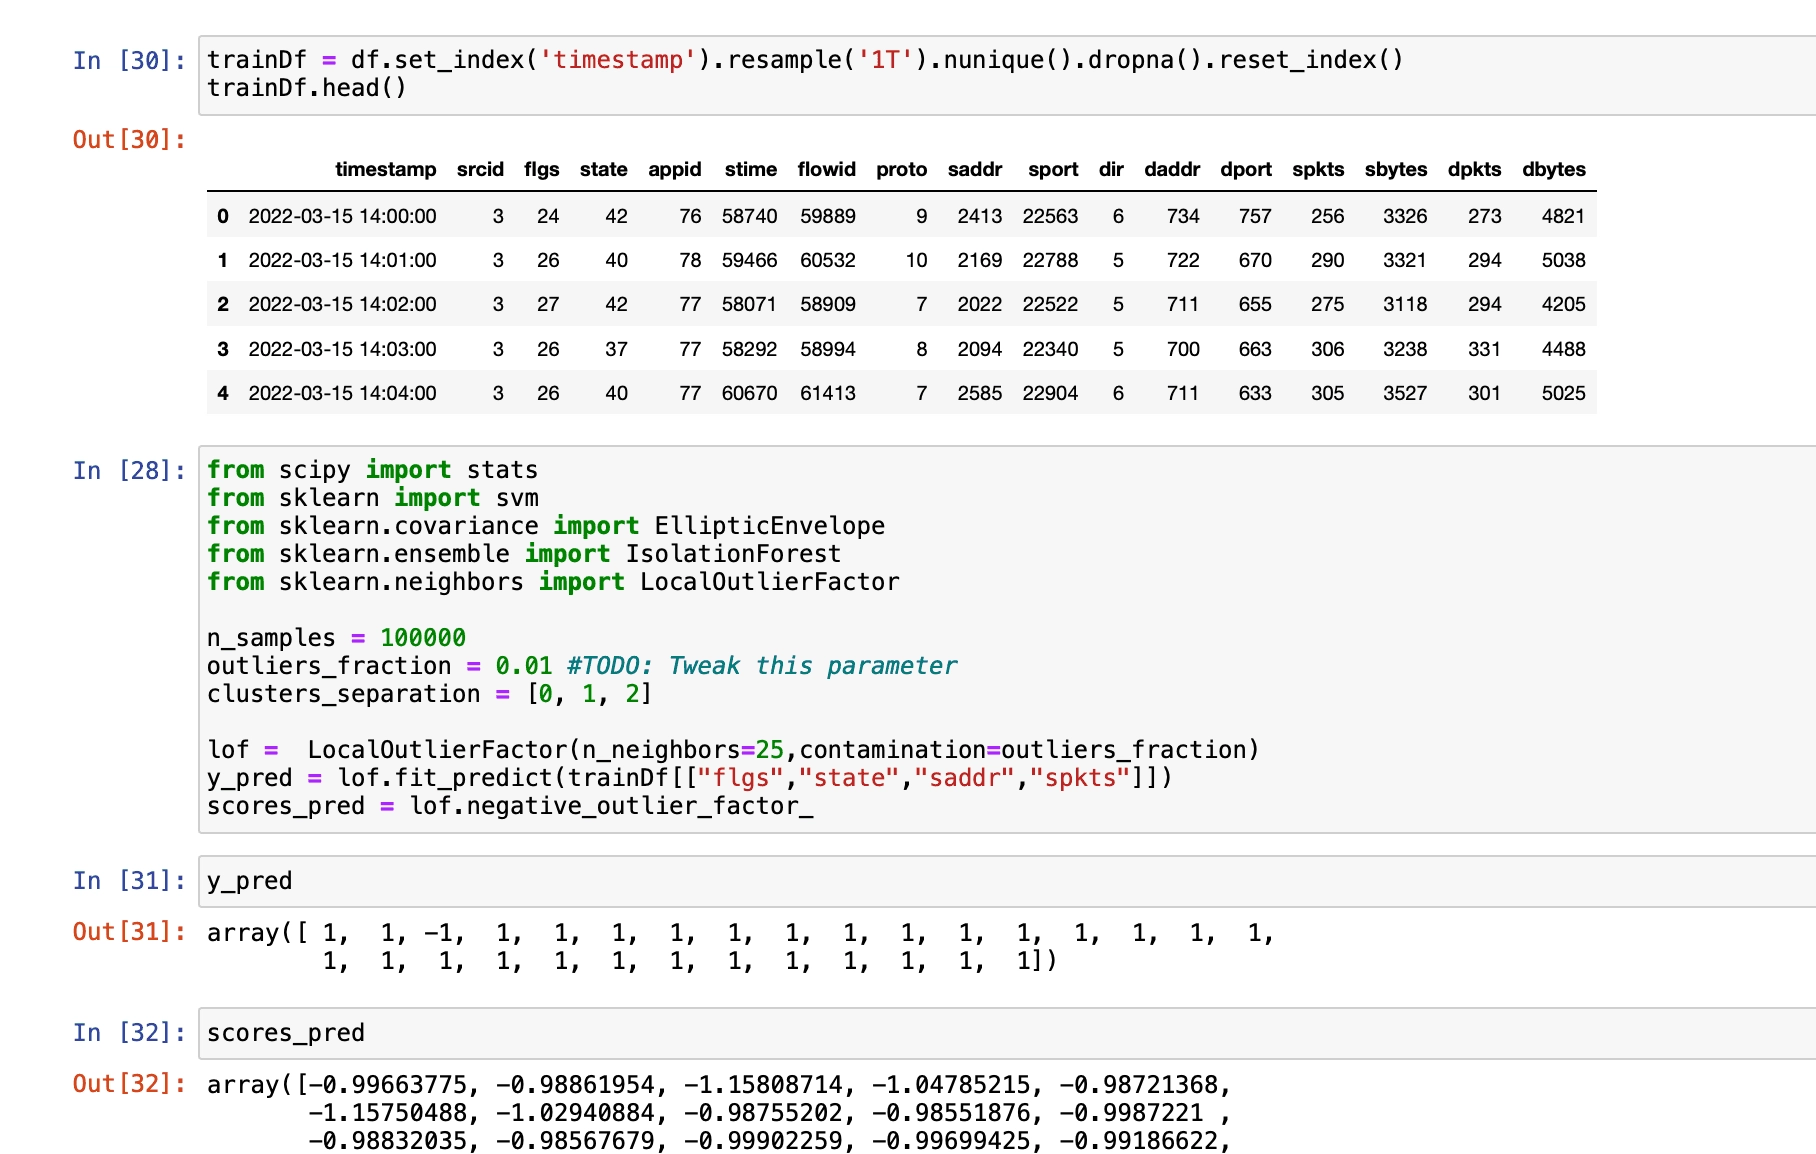 Running ML tooling via Jupyter notebooks to detect outliers.